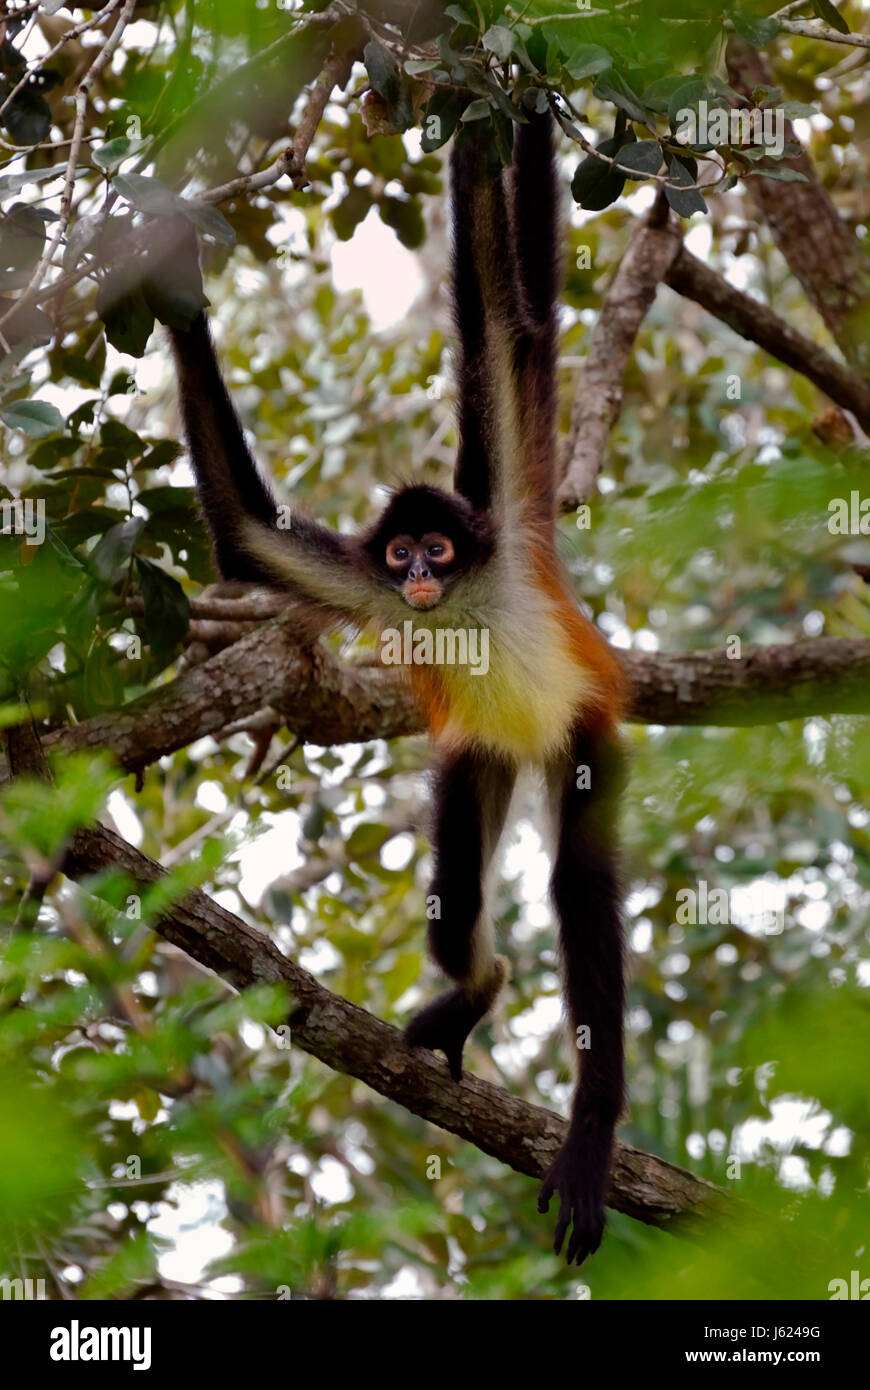 animal monkey clever at sign @ agile animal mammal fauna leaves monkey look Stock Photo